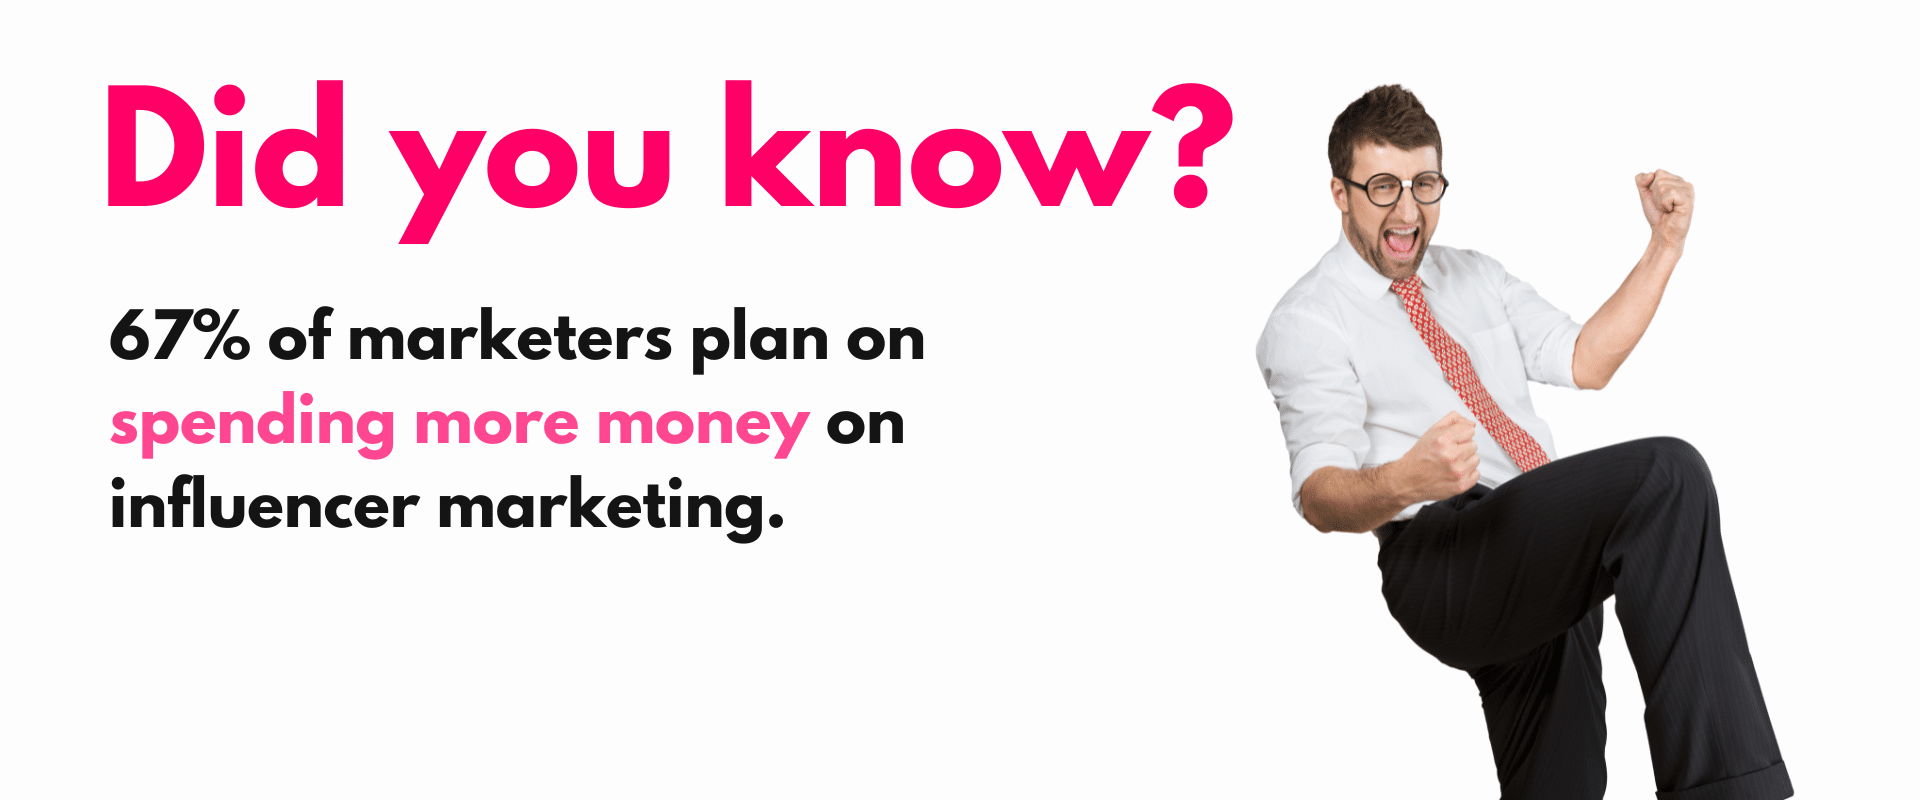 Did you know 75% of marketers plan on spending more influence money on influencer marketing.